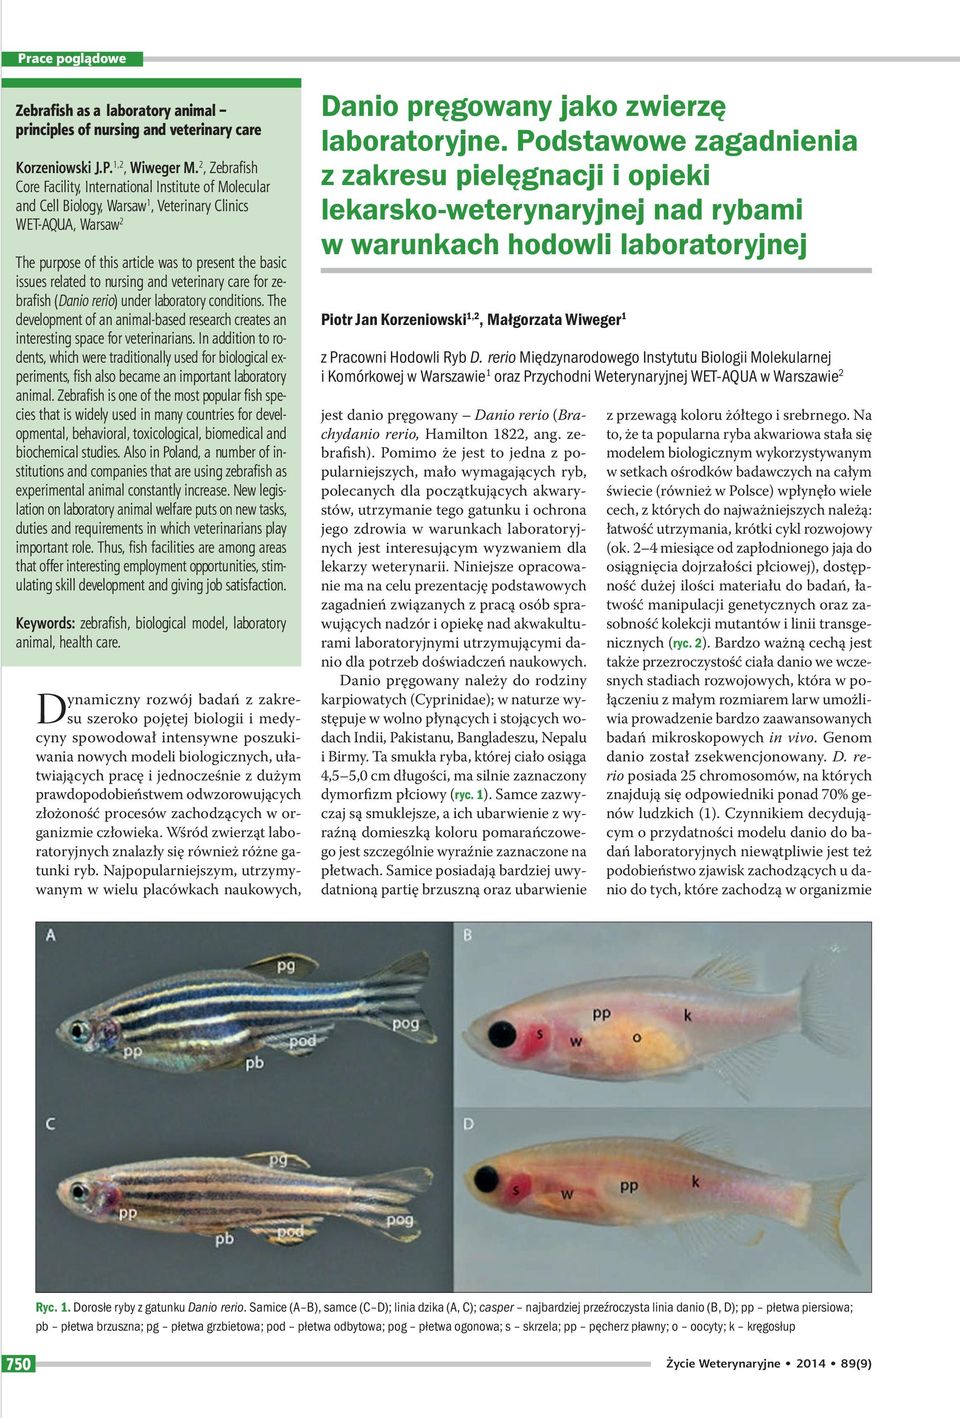 to nursing and veterinary care for zebrafish (Danio rerio) under laboratory conditions. The development of an animal-based research creates an interesting space for veterinarians.